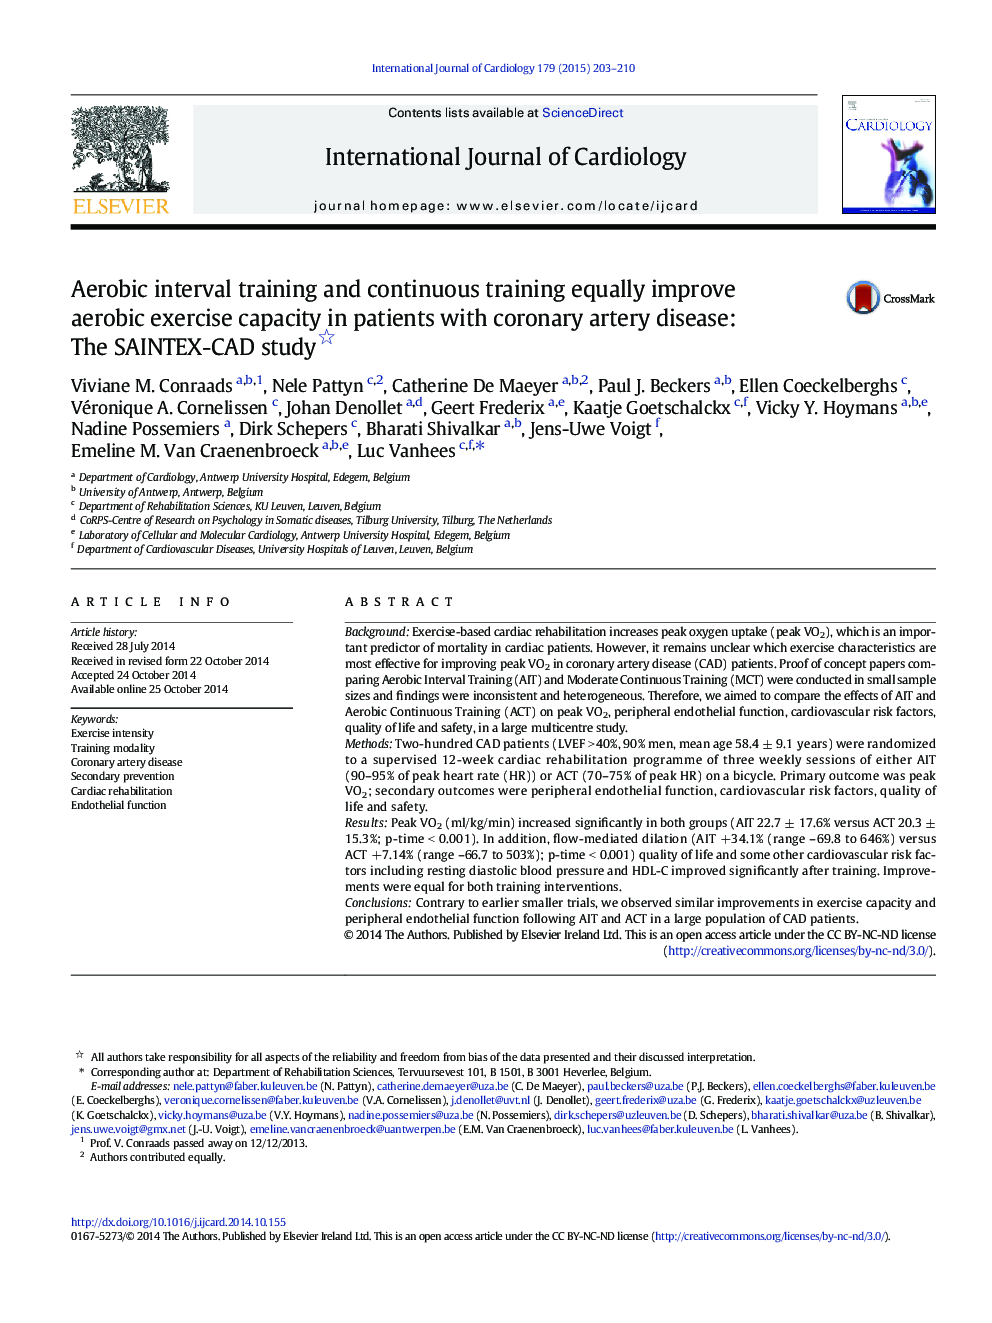 Aerobic interval training and continuous training equally improve aerobic exercise capacity in patients with coronary artery disease: The SAINTEX-CAD study